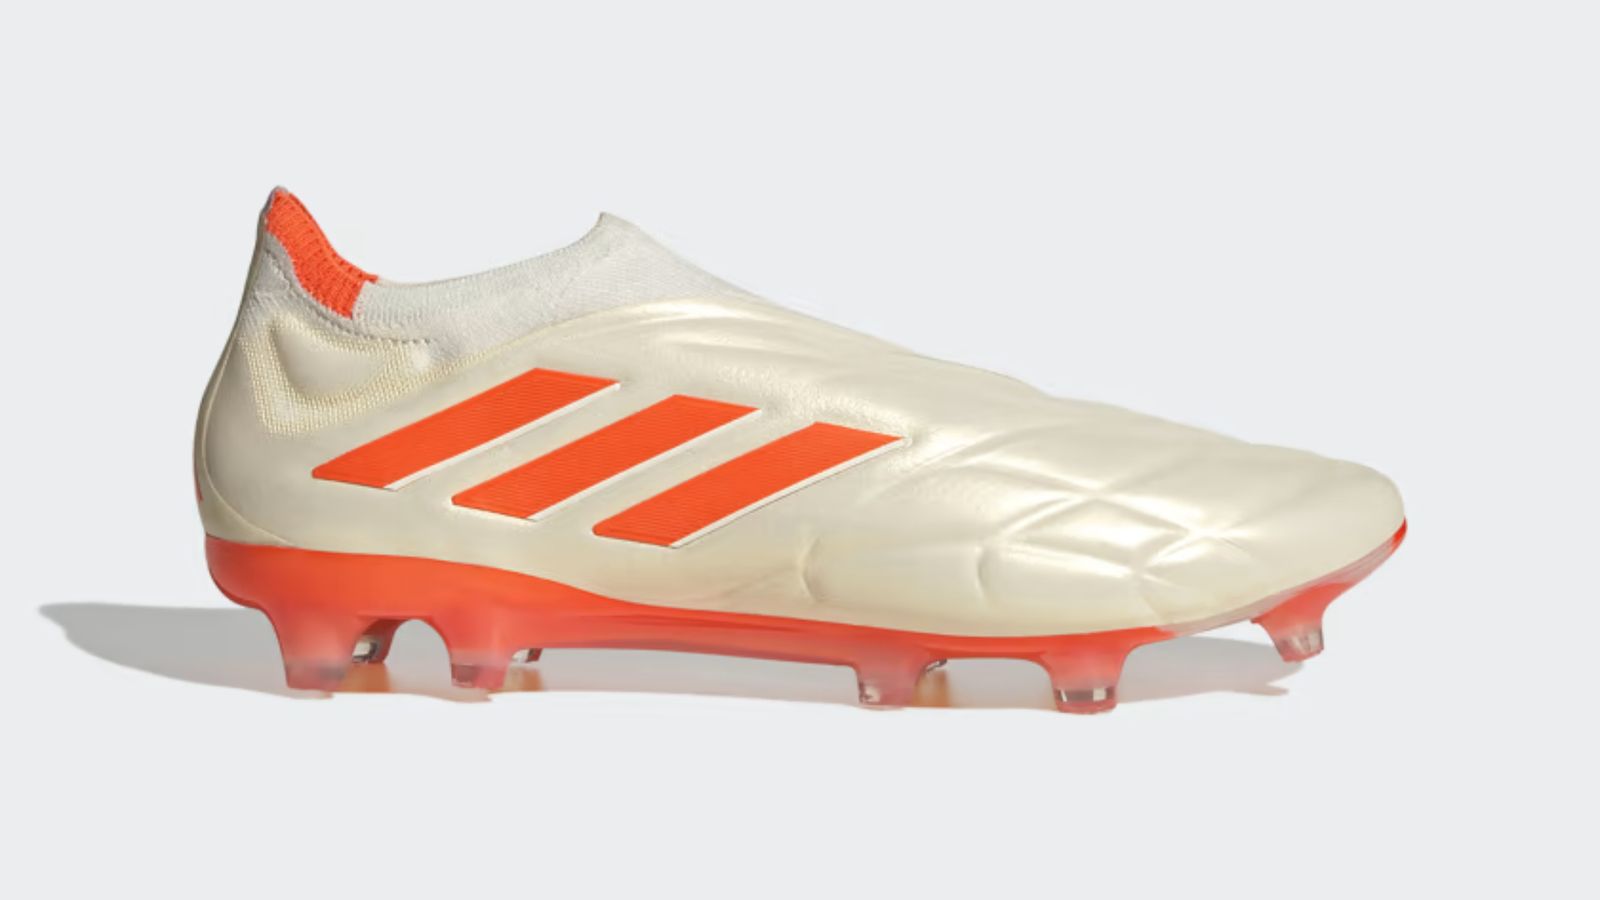 adidas Copa Pure+ product image of an off-white football boot featuring bright orange accents.